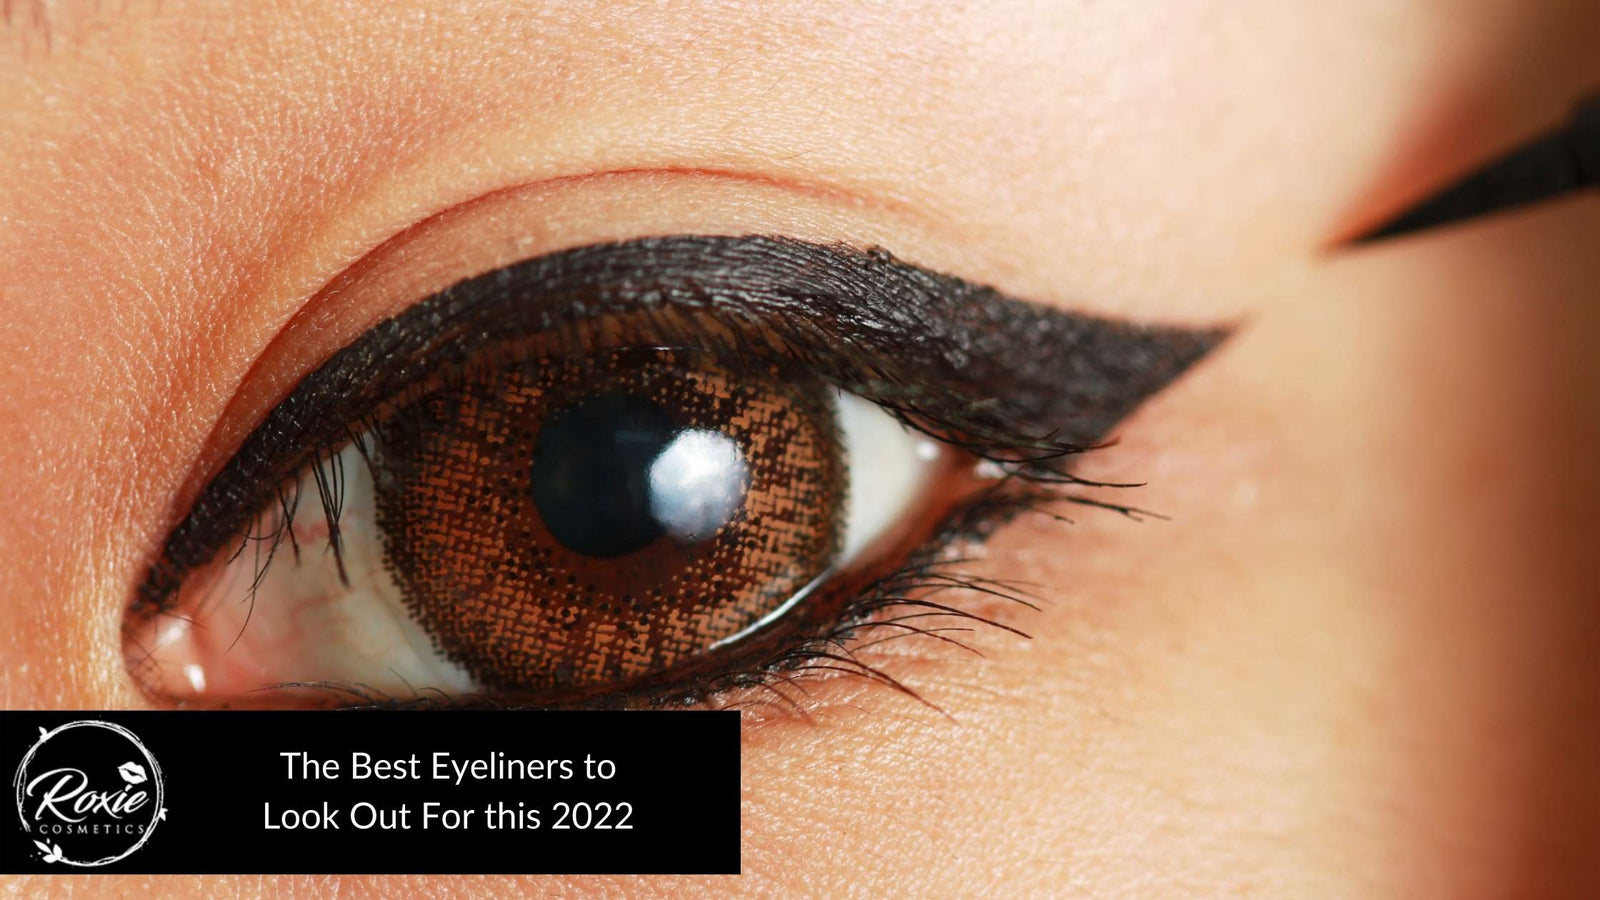 10 Best Out 2022 For Cosmetics Eyeliners this Look to Roxie –